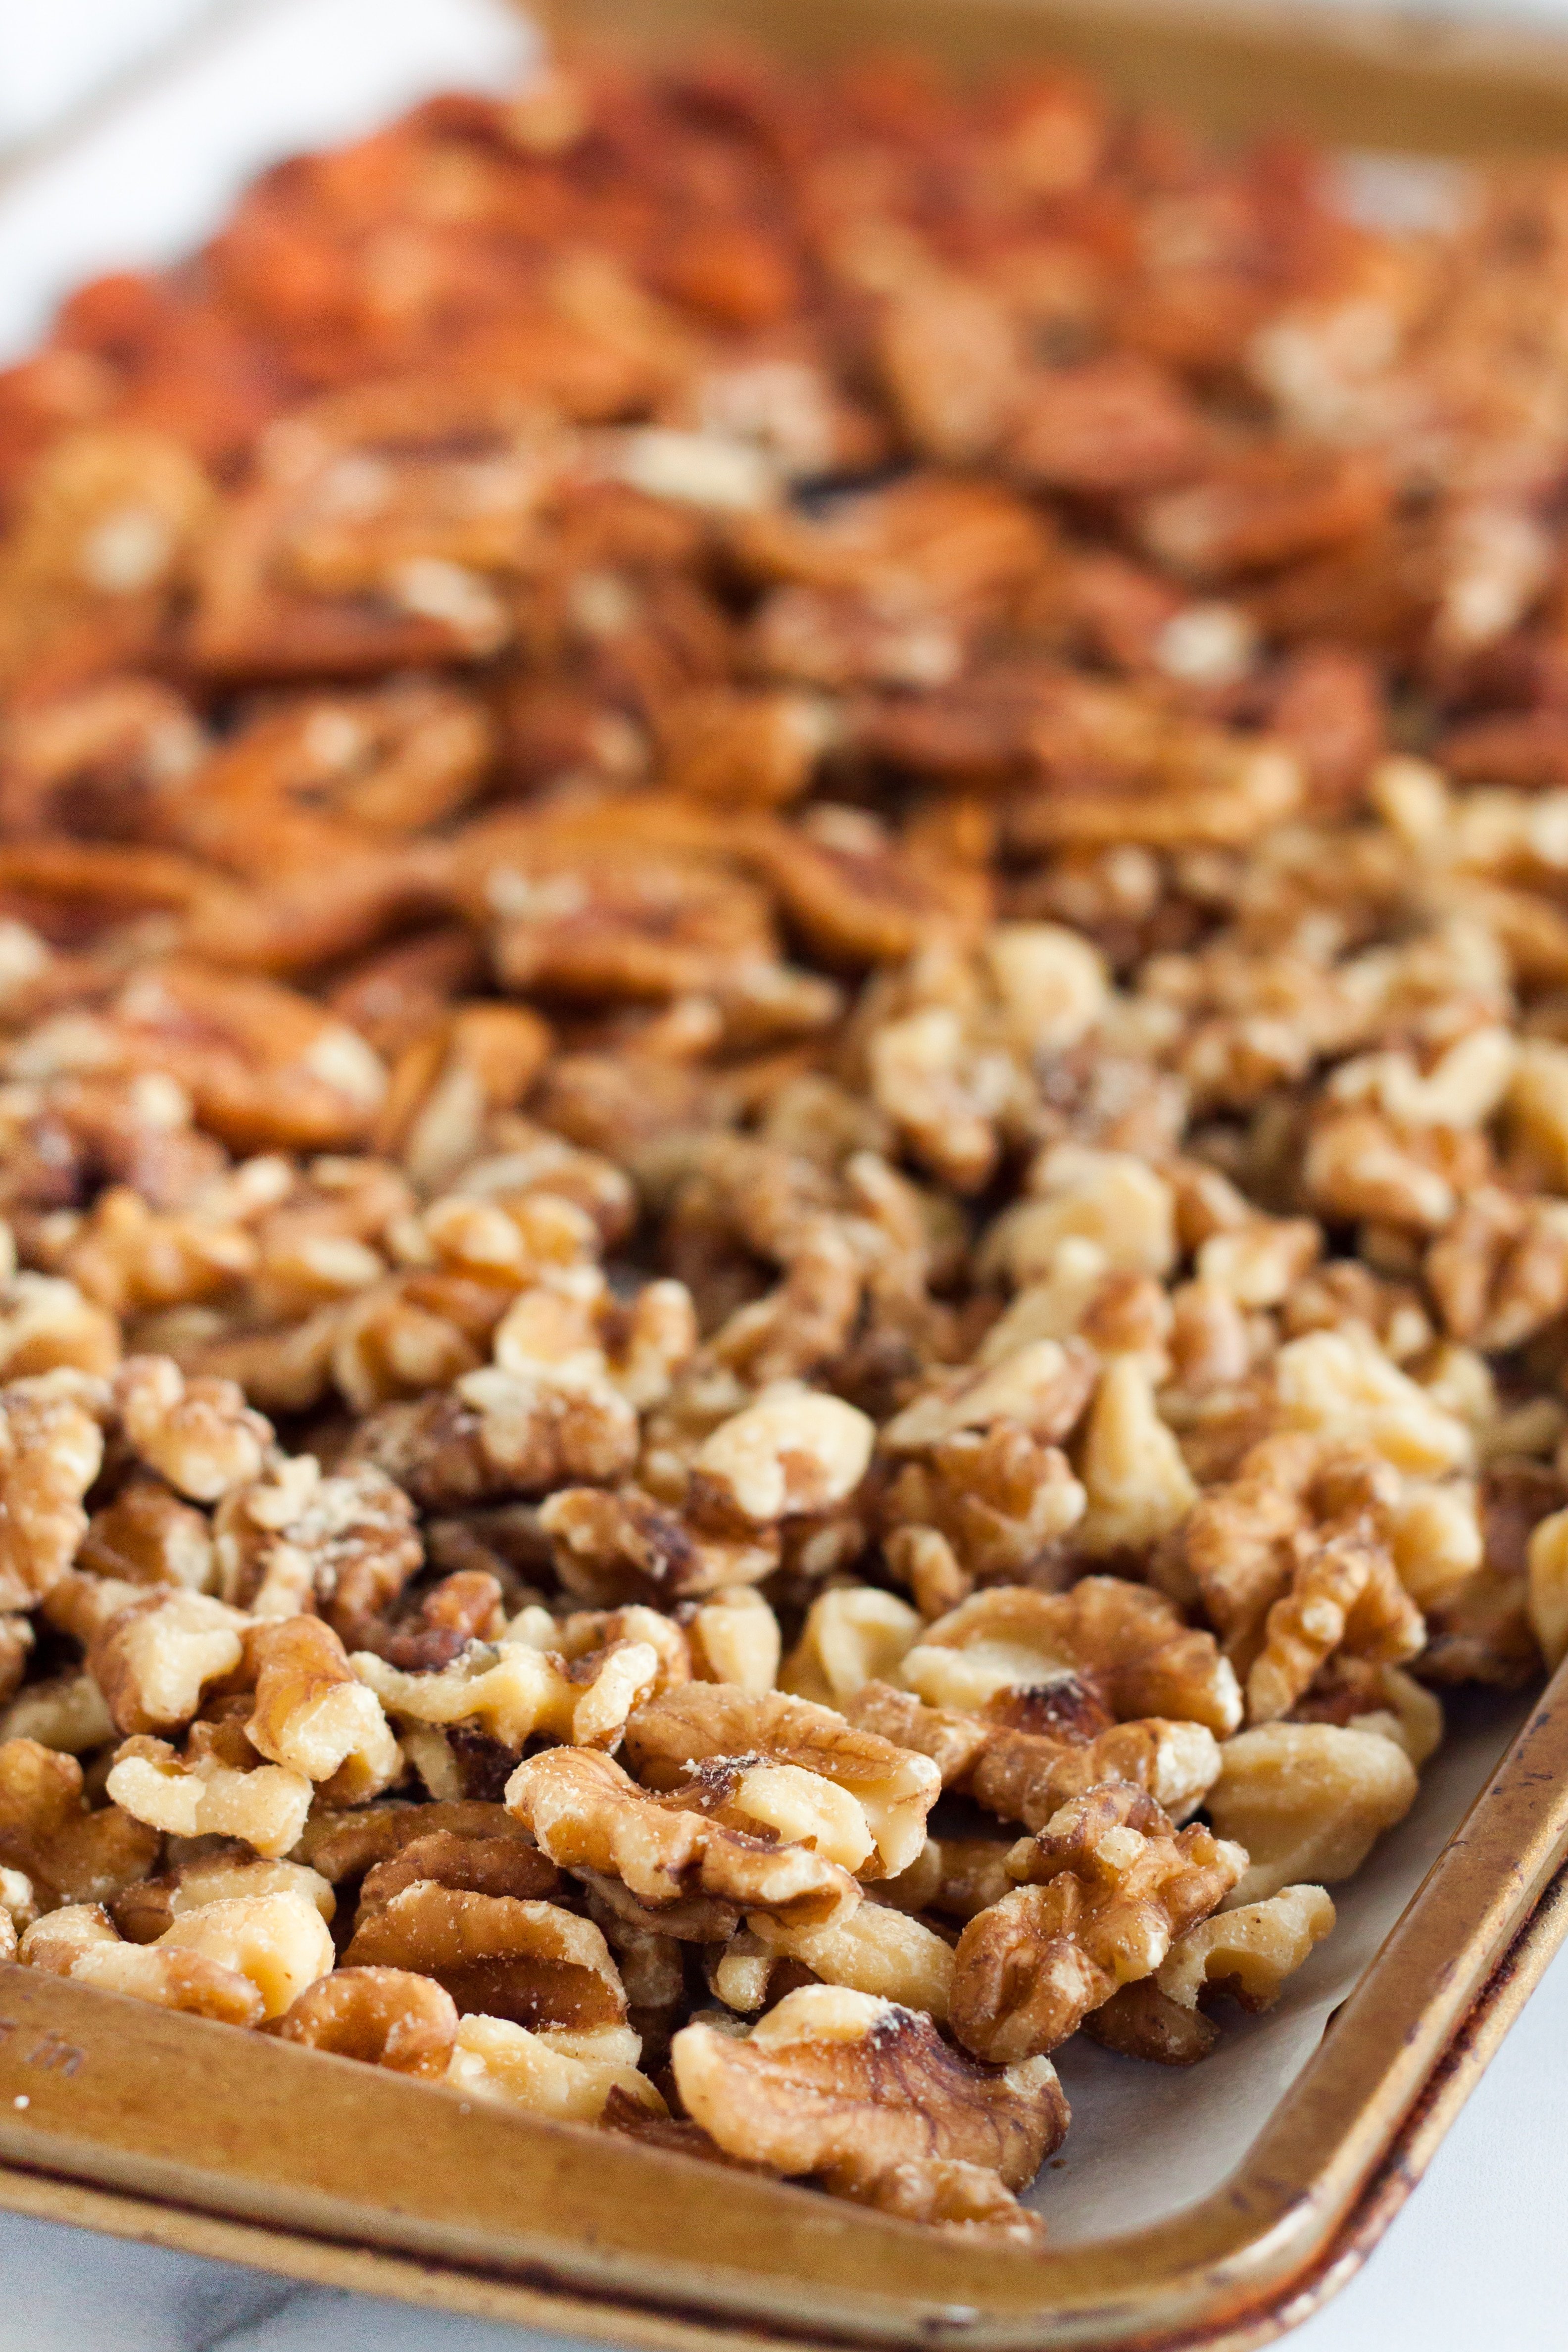 Baking sheet with Almonds, Walnuts, and Pecans placed evenly across with a drizzle of coconut oil.